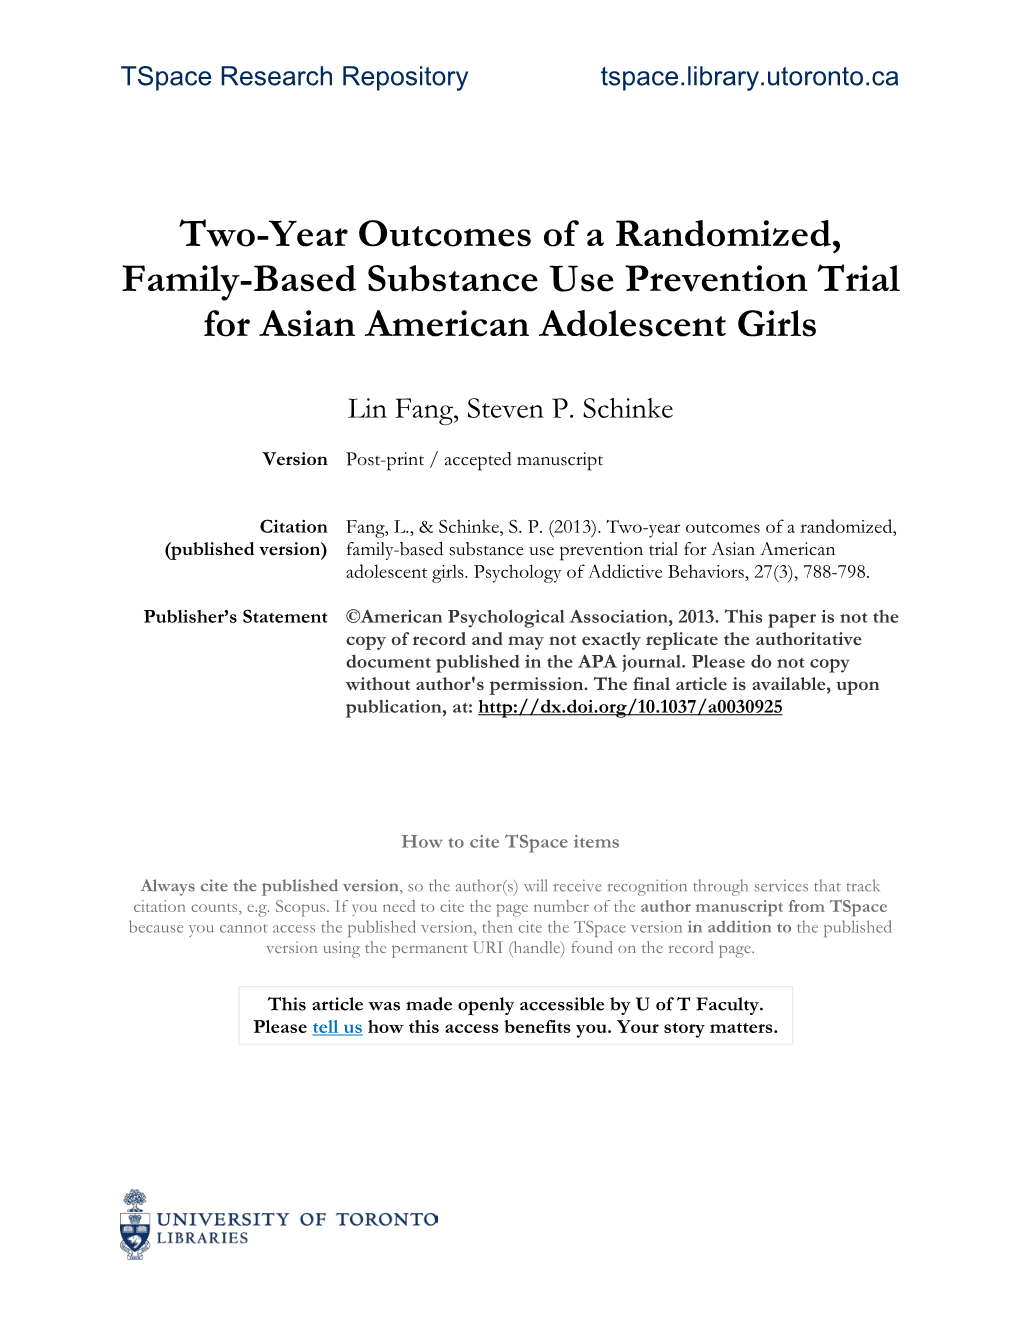 Two-Year Outcomes of a Randomized, Family-Based Substance Use Prevention Trial for Asian American Adolescent Girls